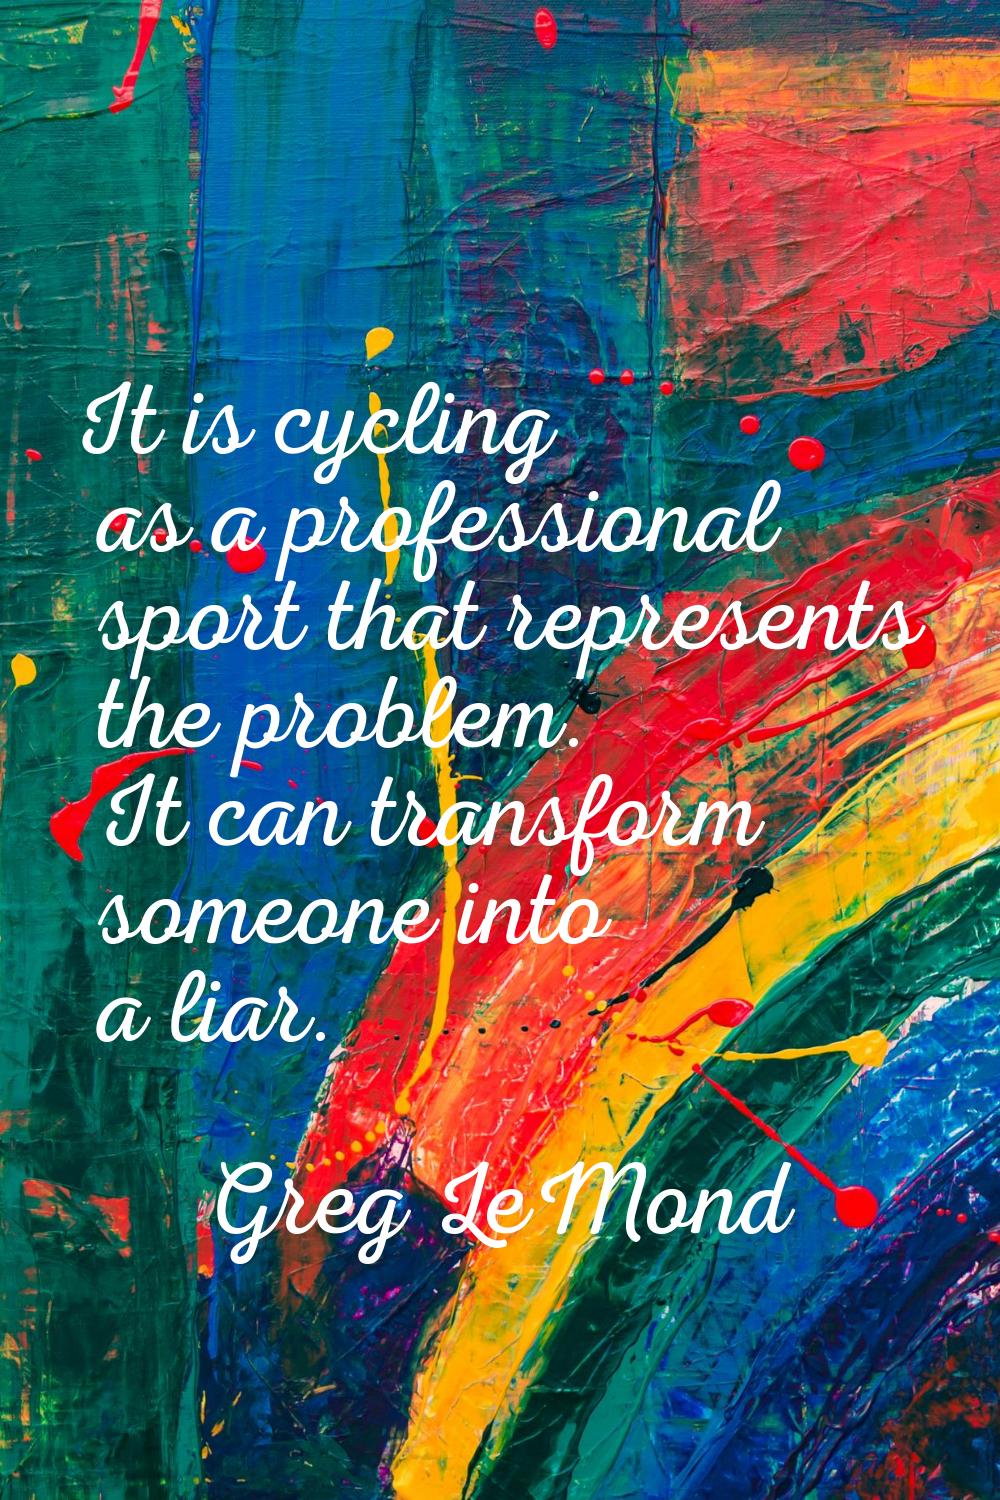 It is cycling as a professional sport that represents the problem. It can transform someone into a 